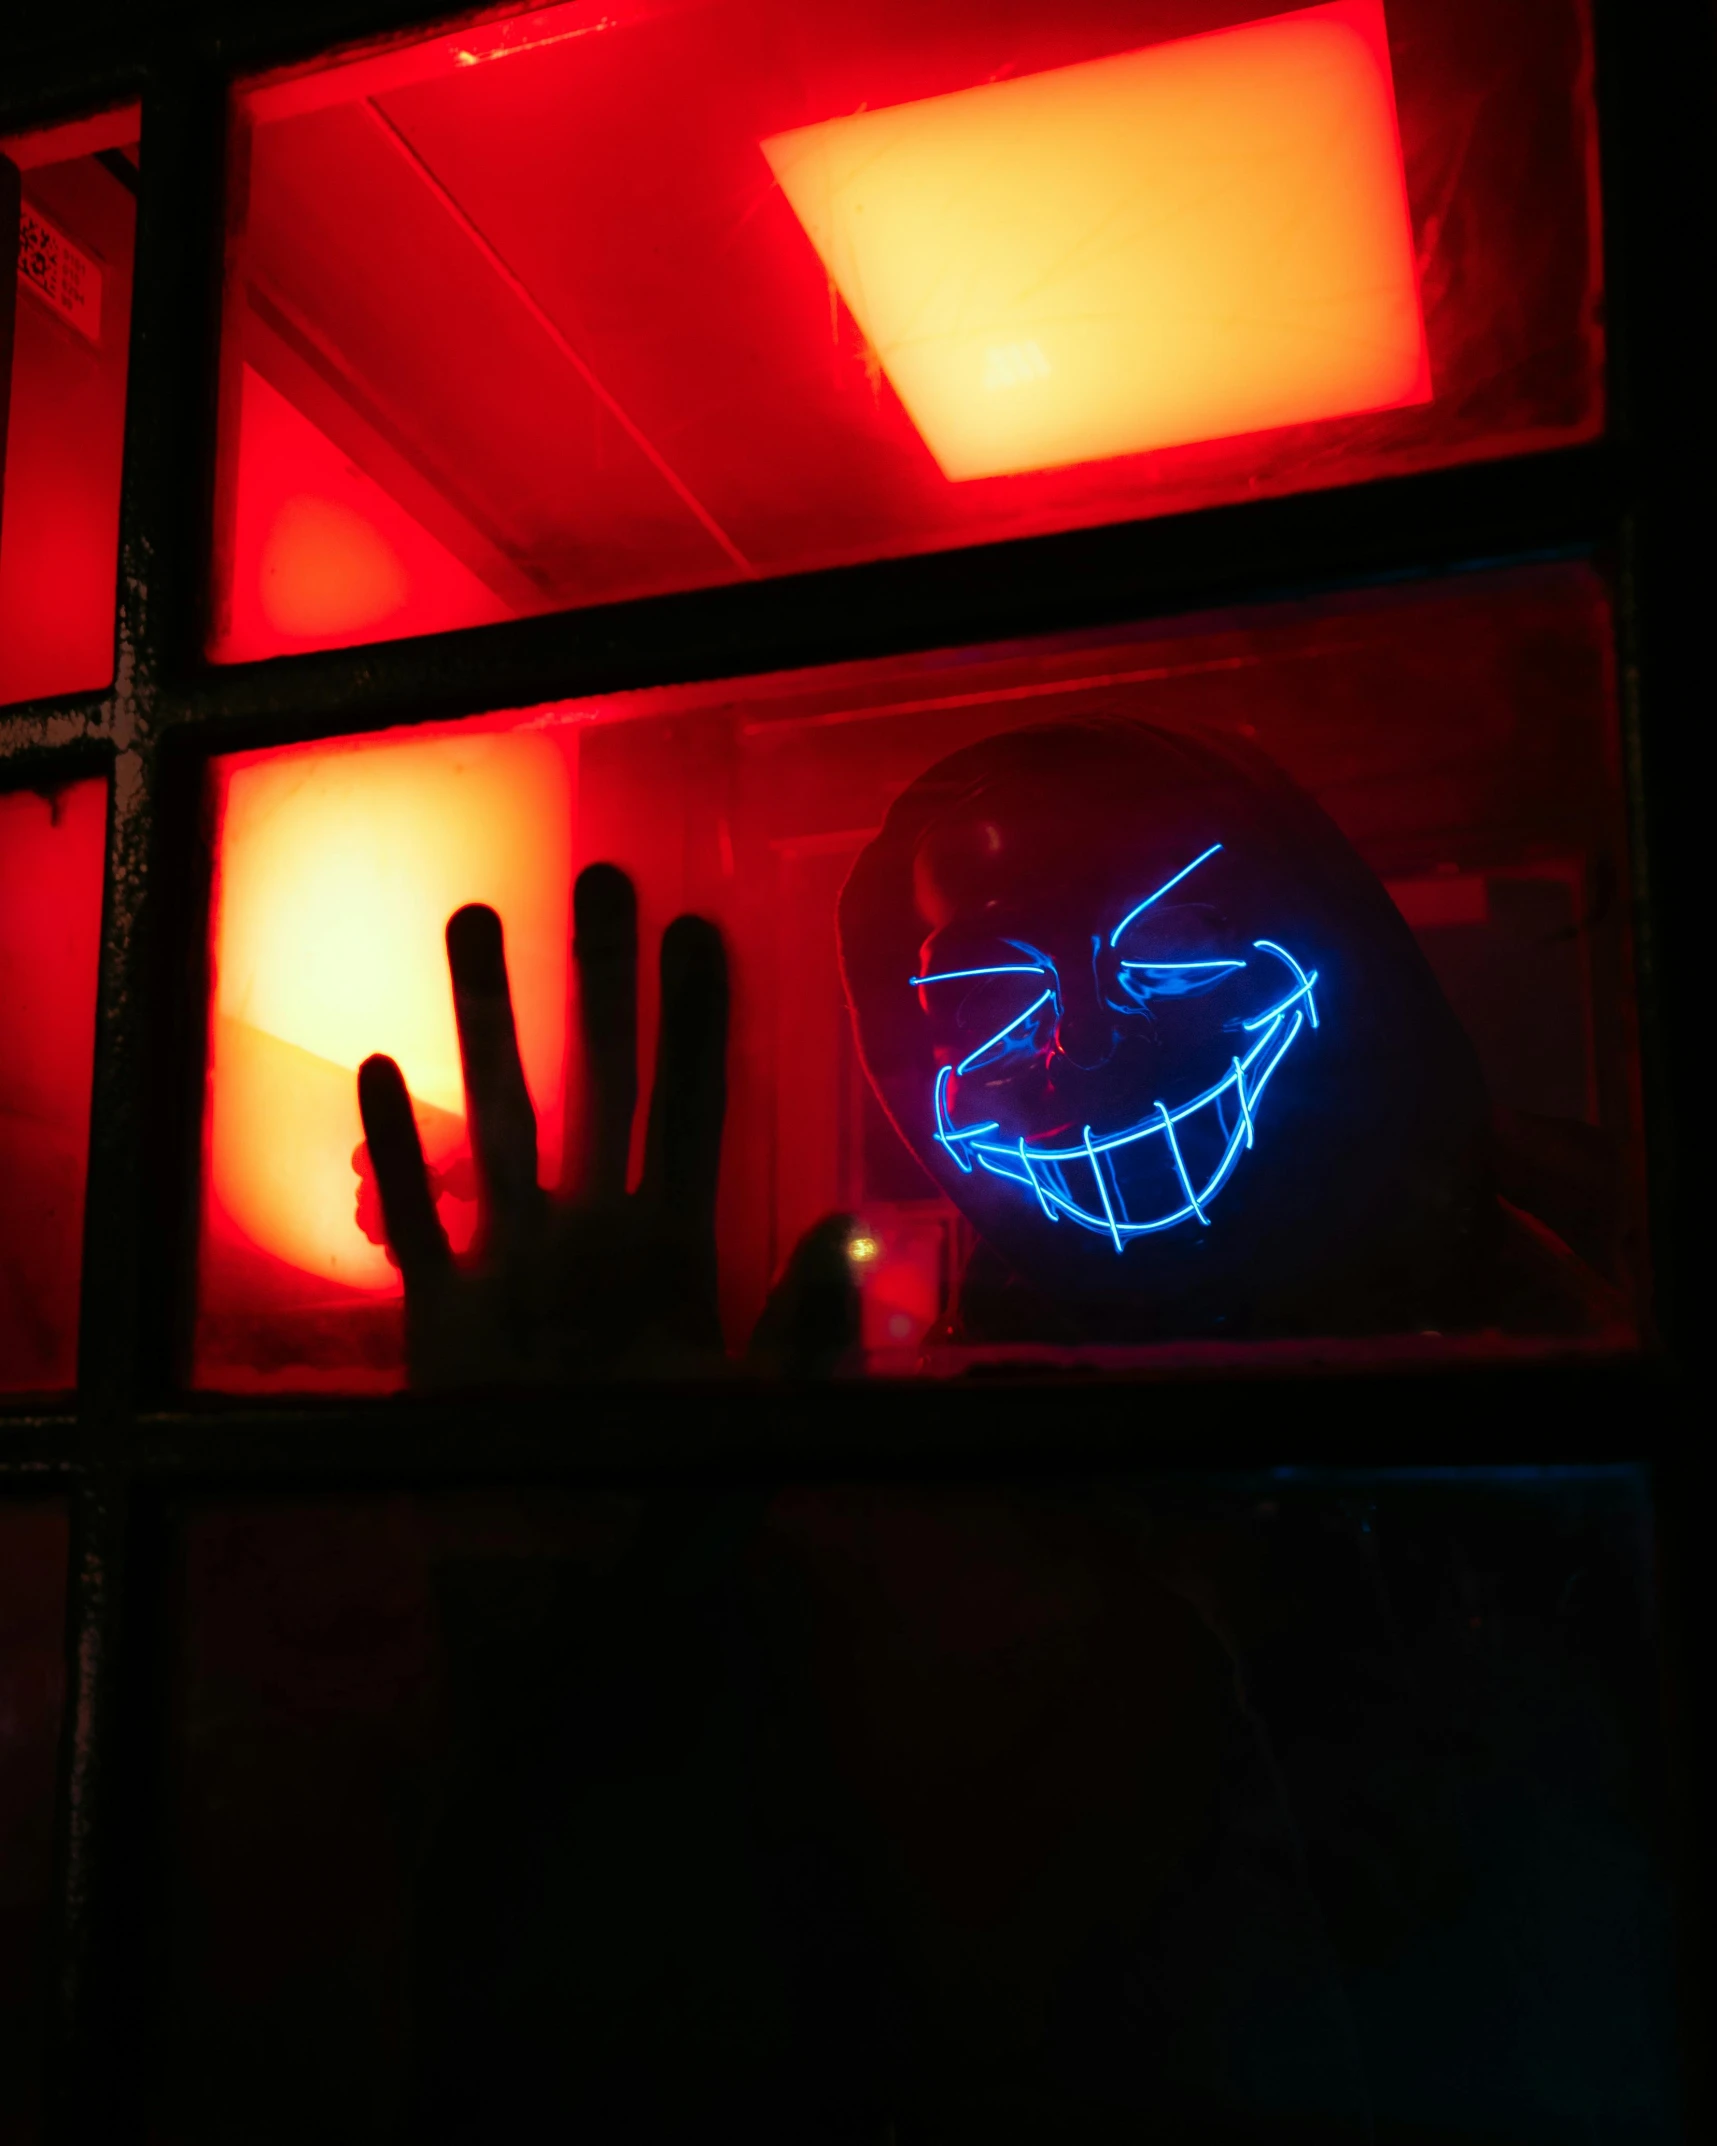 a close up of a neon sign in a window, a hologram, pexels contest winner, scary smile, holding his hands up to his face, villain wearing a red oni mask, wall darkness